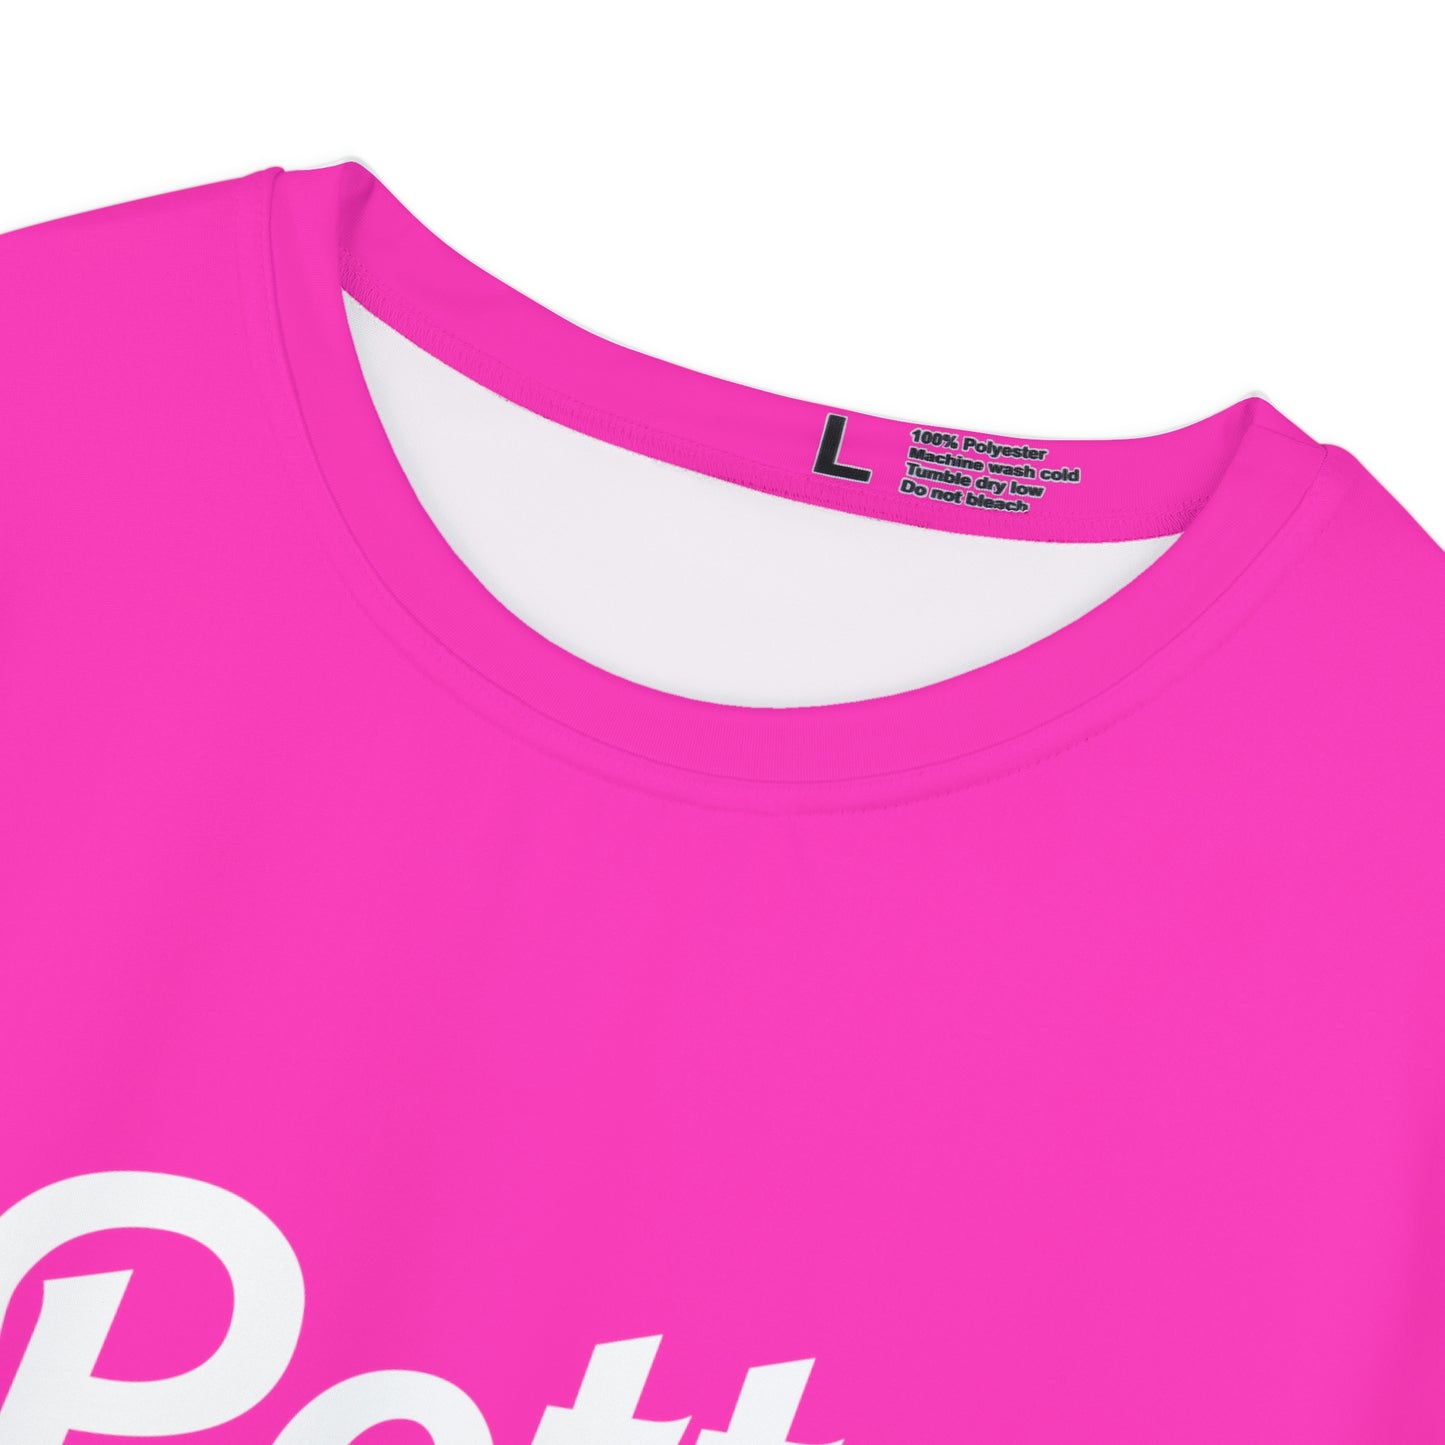 Petty Barbie, Bachelorette Party Shirts, Bridesmaid Gifts, Here comes the Party Tees, Group Party Favor Shirts, Bridal Party Shirt for women